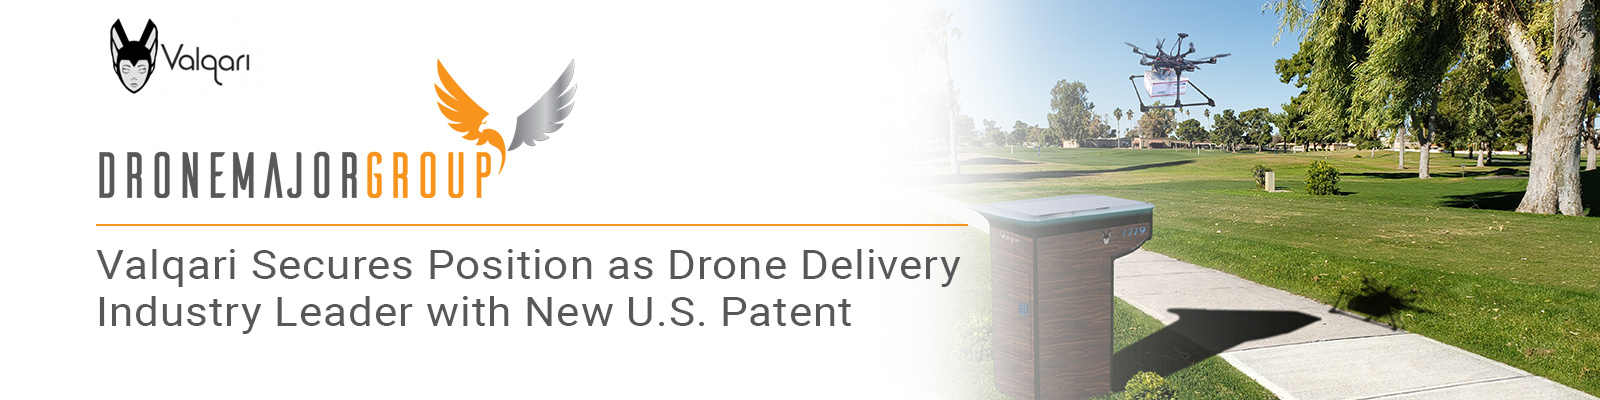 Valqari Secures Position as Drone Delivery Industry Leader with New U.S. Patent